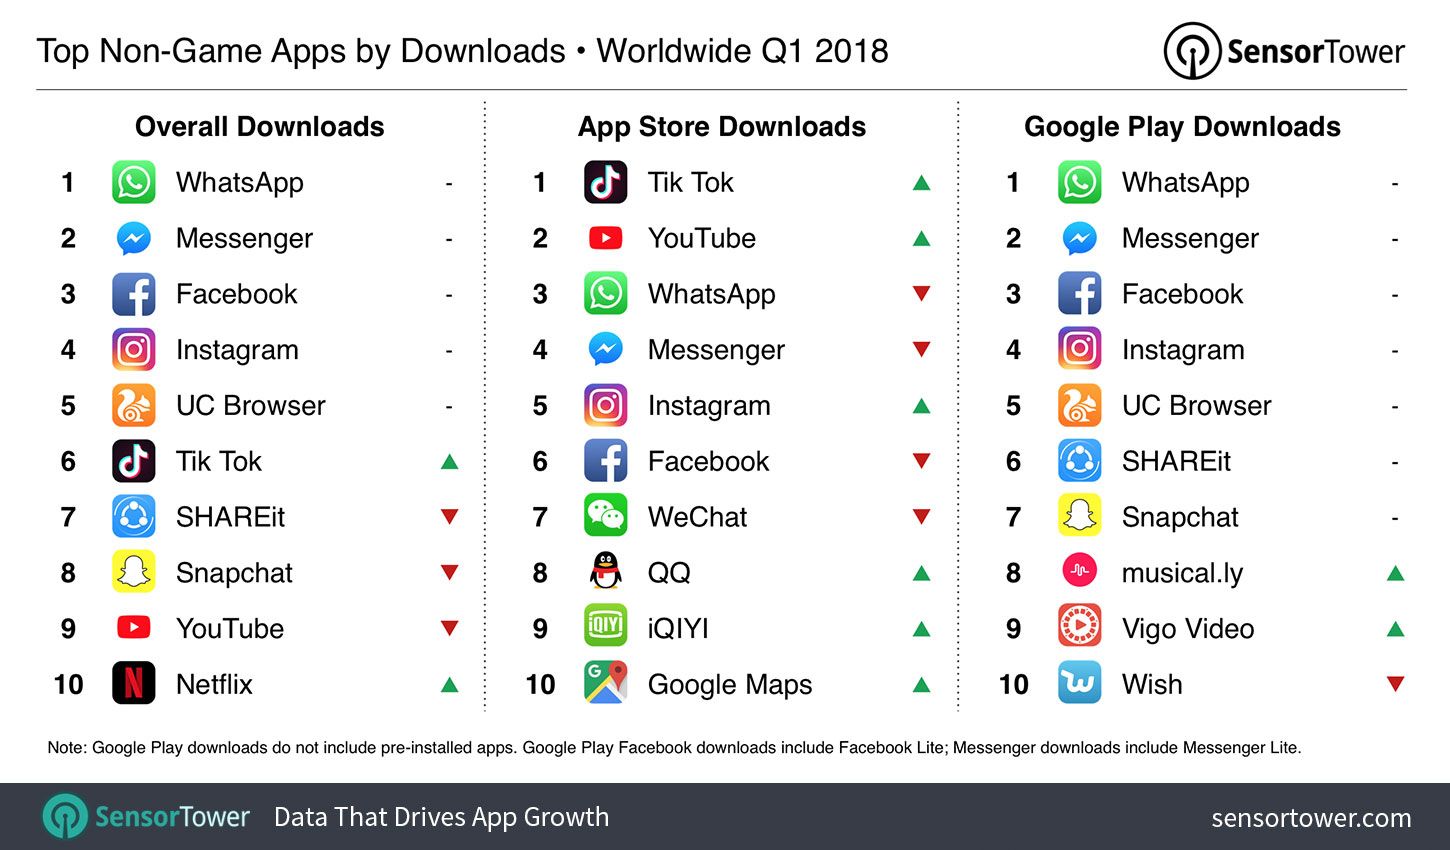 Chart showing the world's most downloaded iOS and Google Play apps for Q1 2018